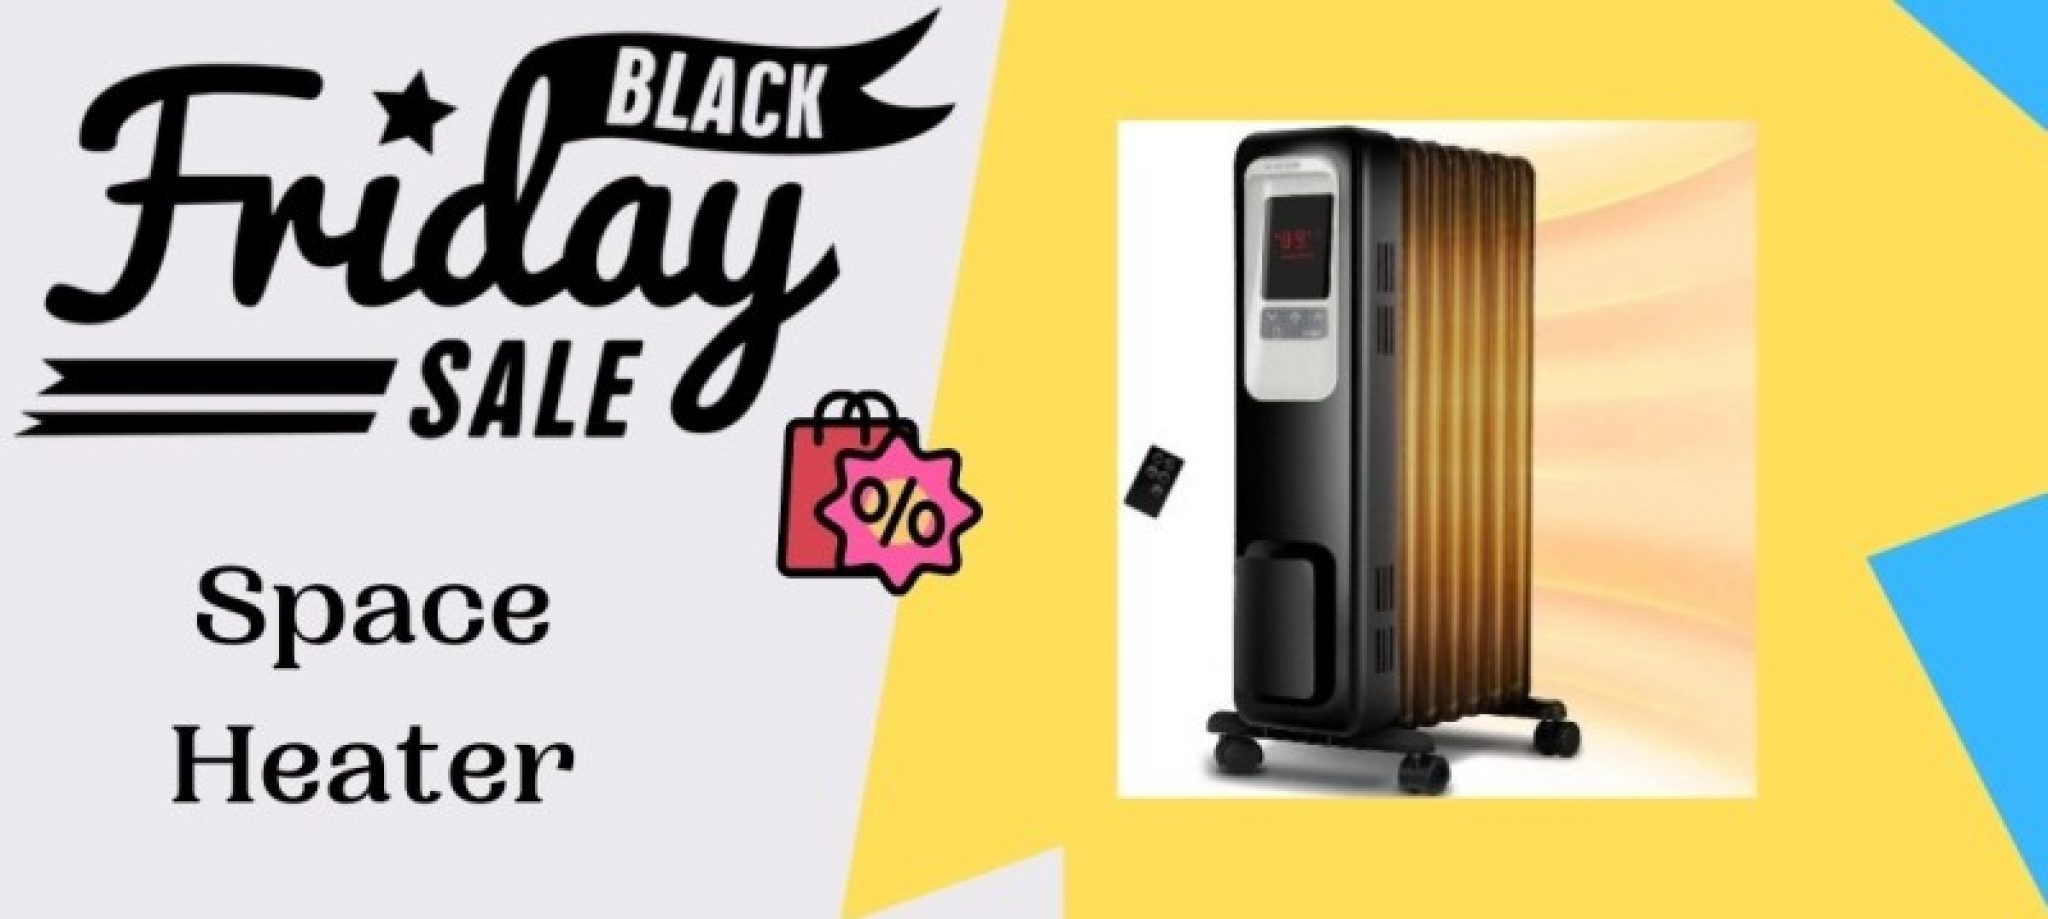 Space Heater Black Friday 2020 Deals - Up To 50% OFF - Does Spidi Have Black Friday Deals